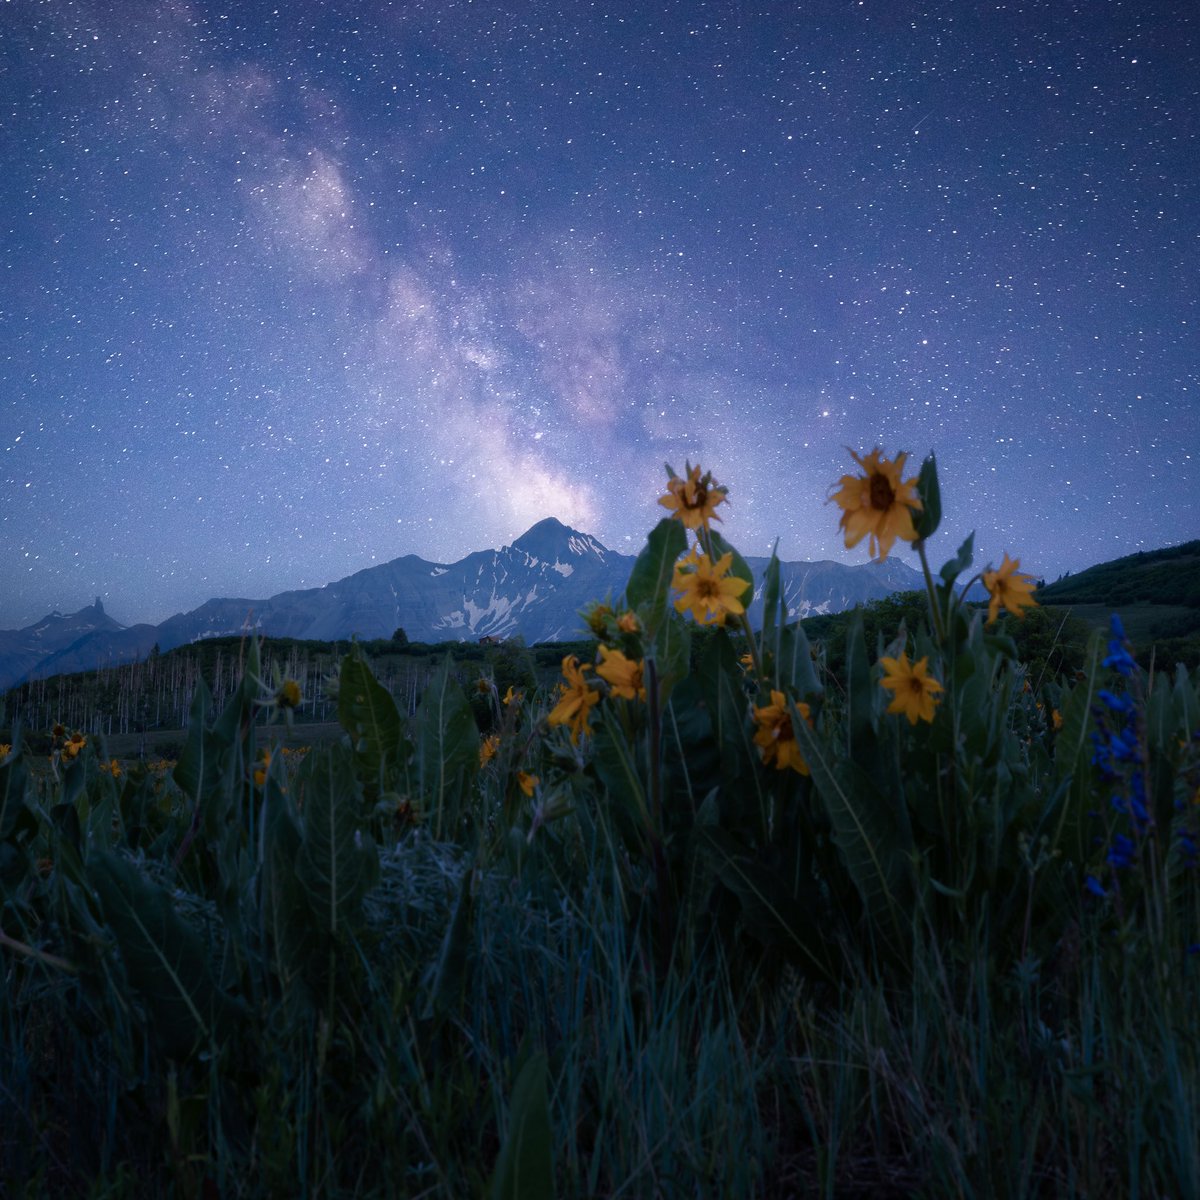 Summer in Colorado featuring wildflowers, the Milky Way, and a 14,000 foot mountain